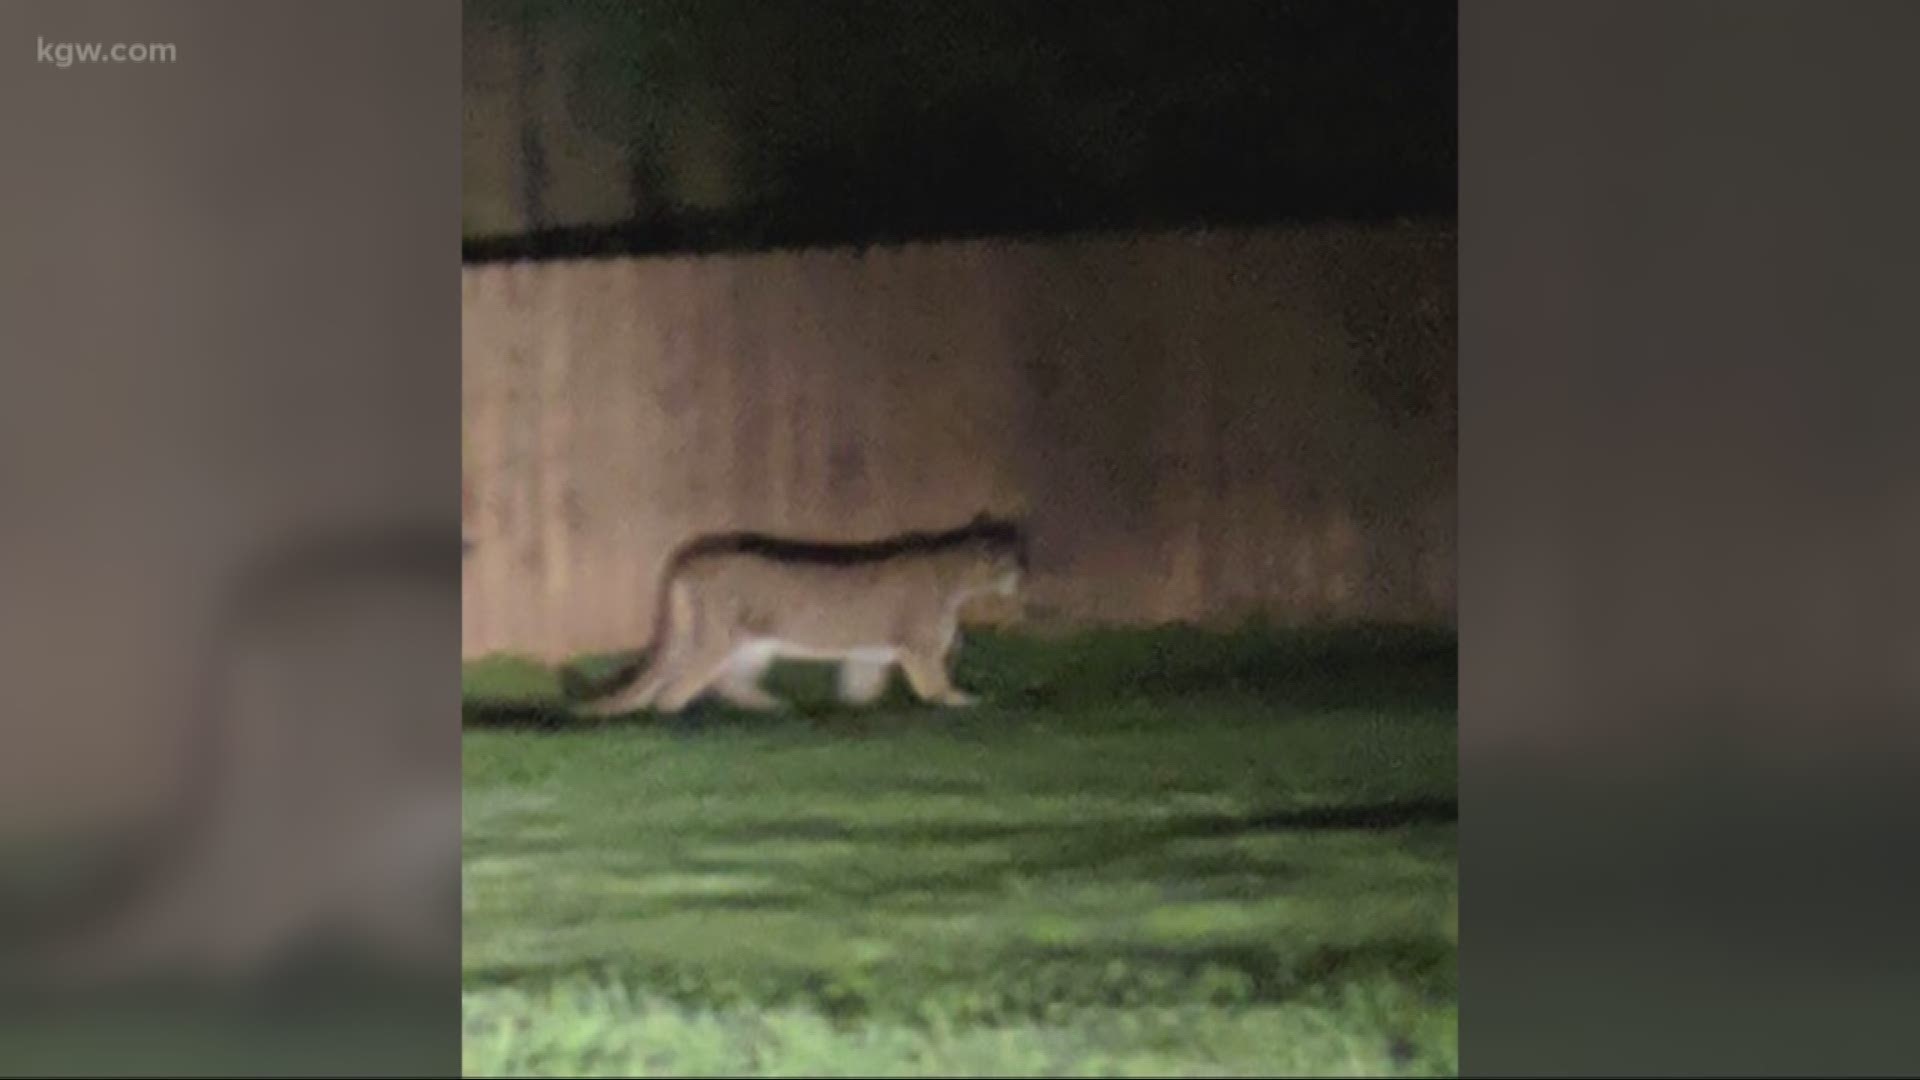 A cougar that attacked a child in Leavenworth, Washington has been found and euthanized.